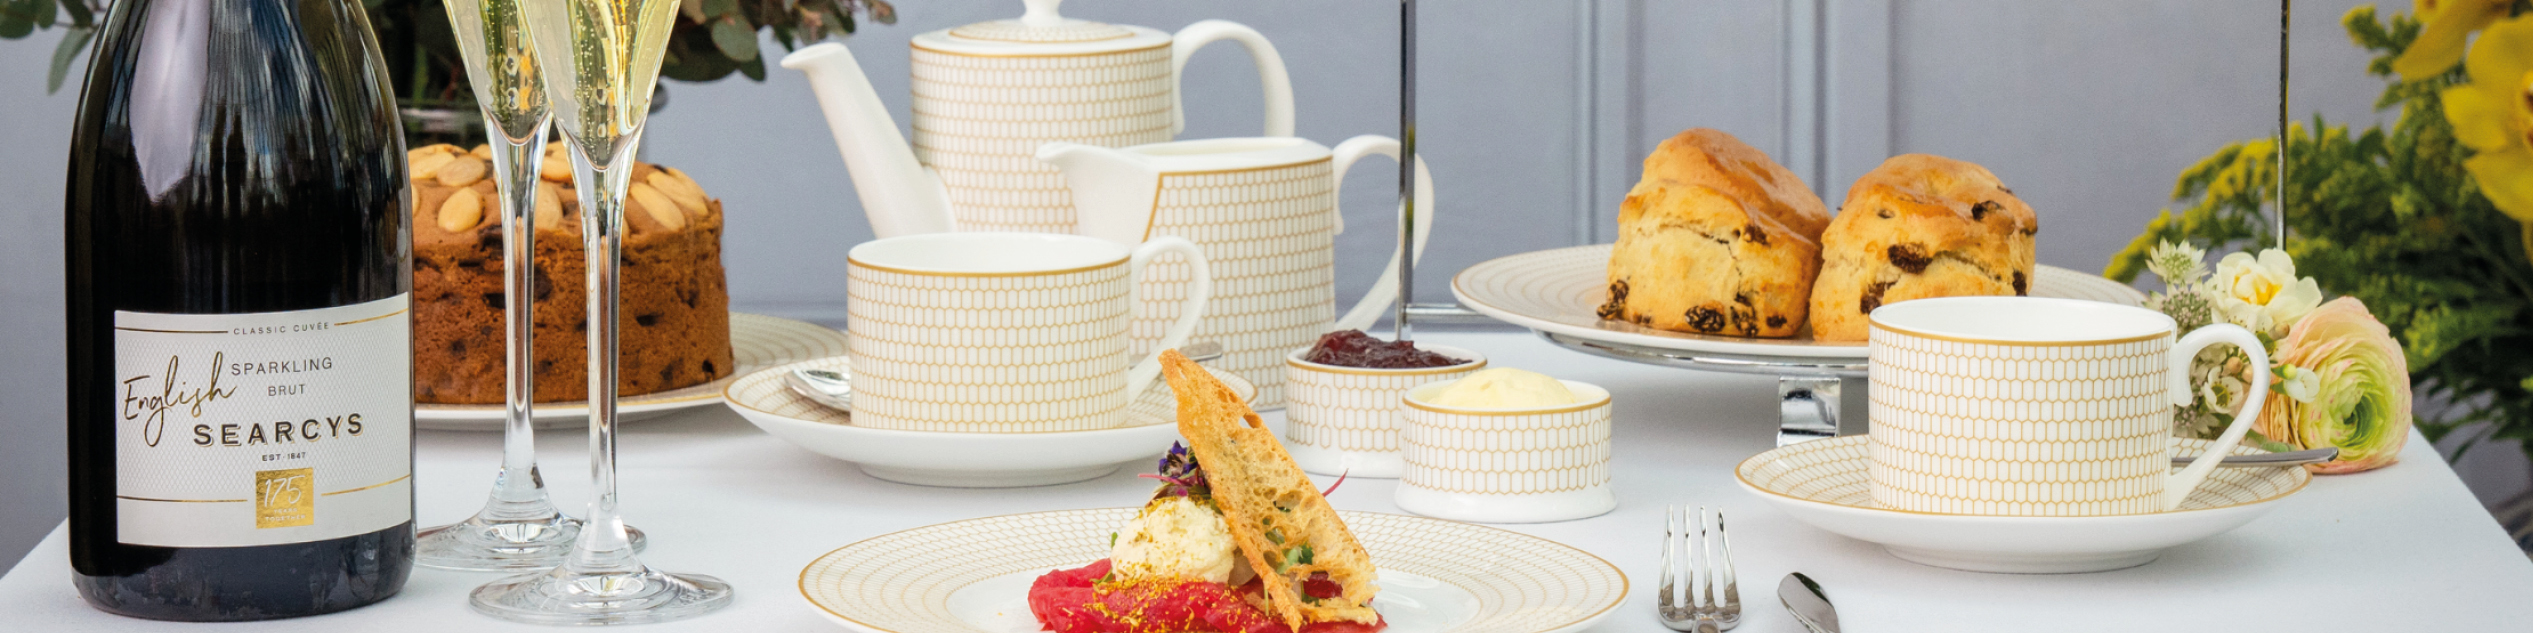 Bespoke Searcys Afternoon Tea Collection